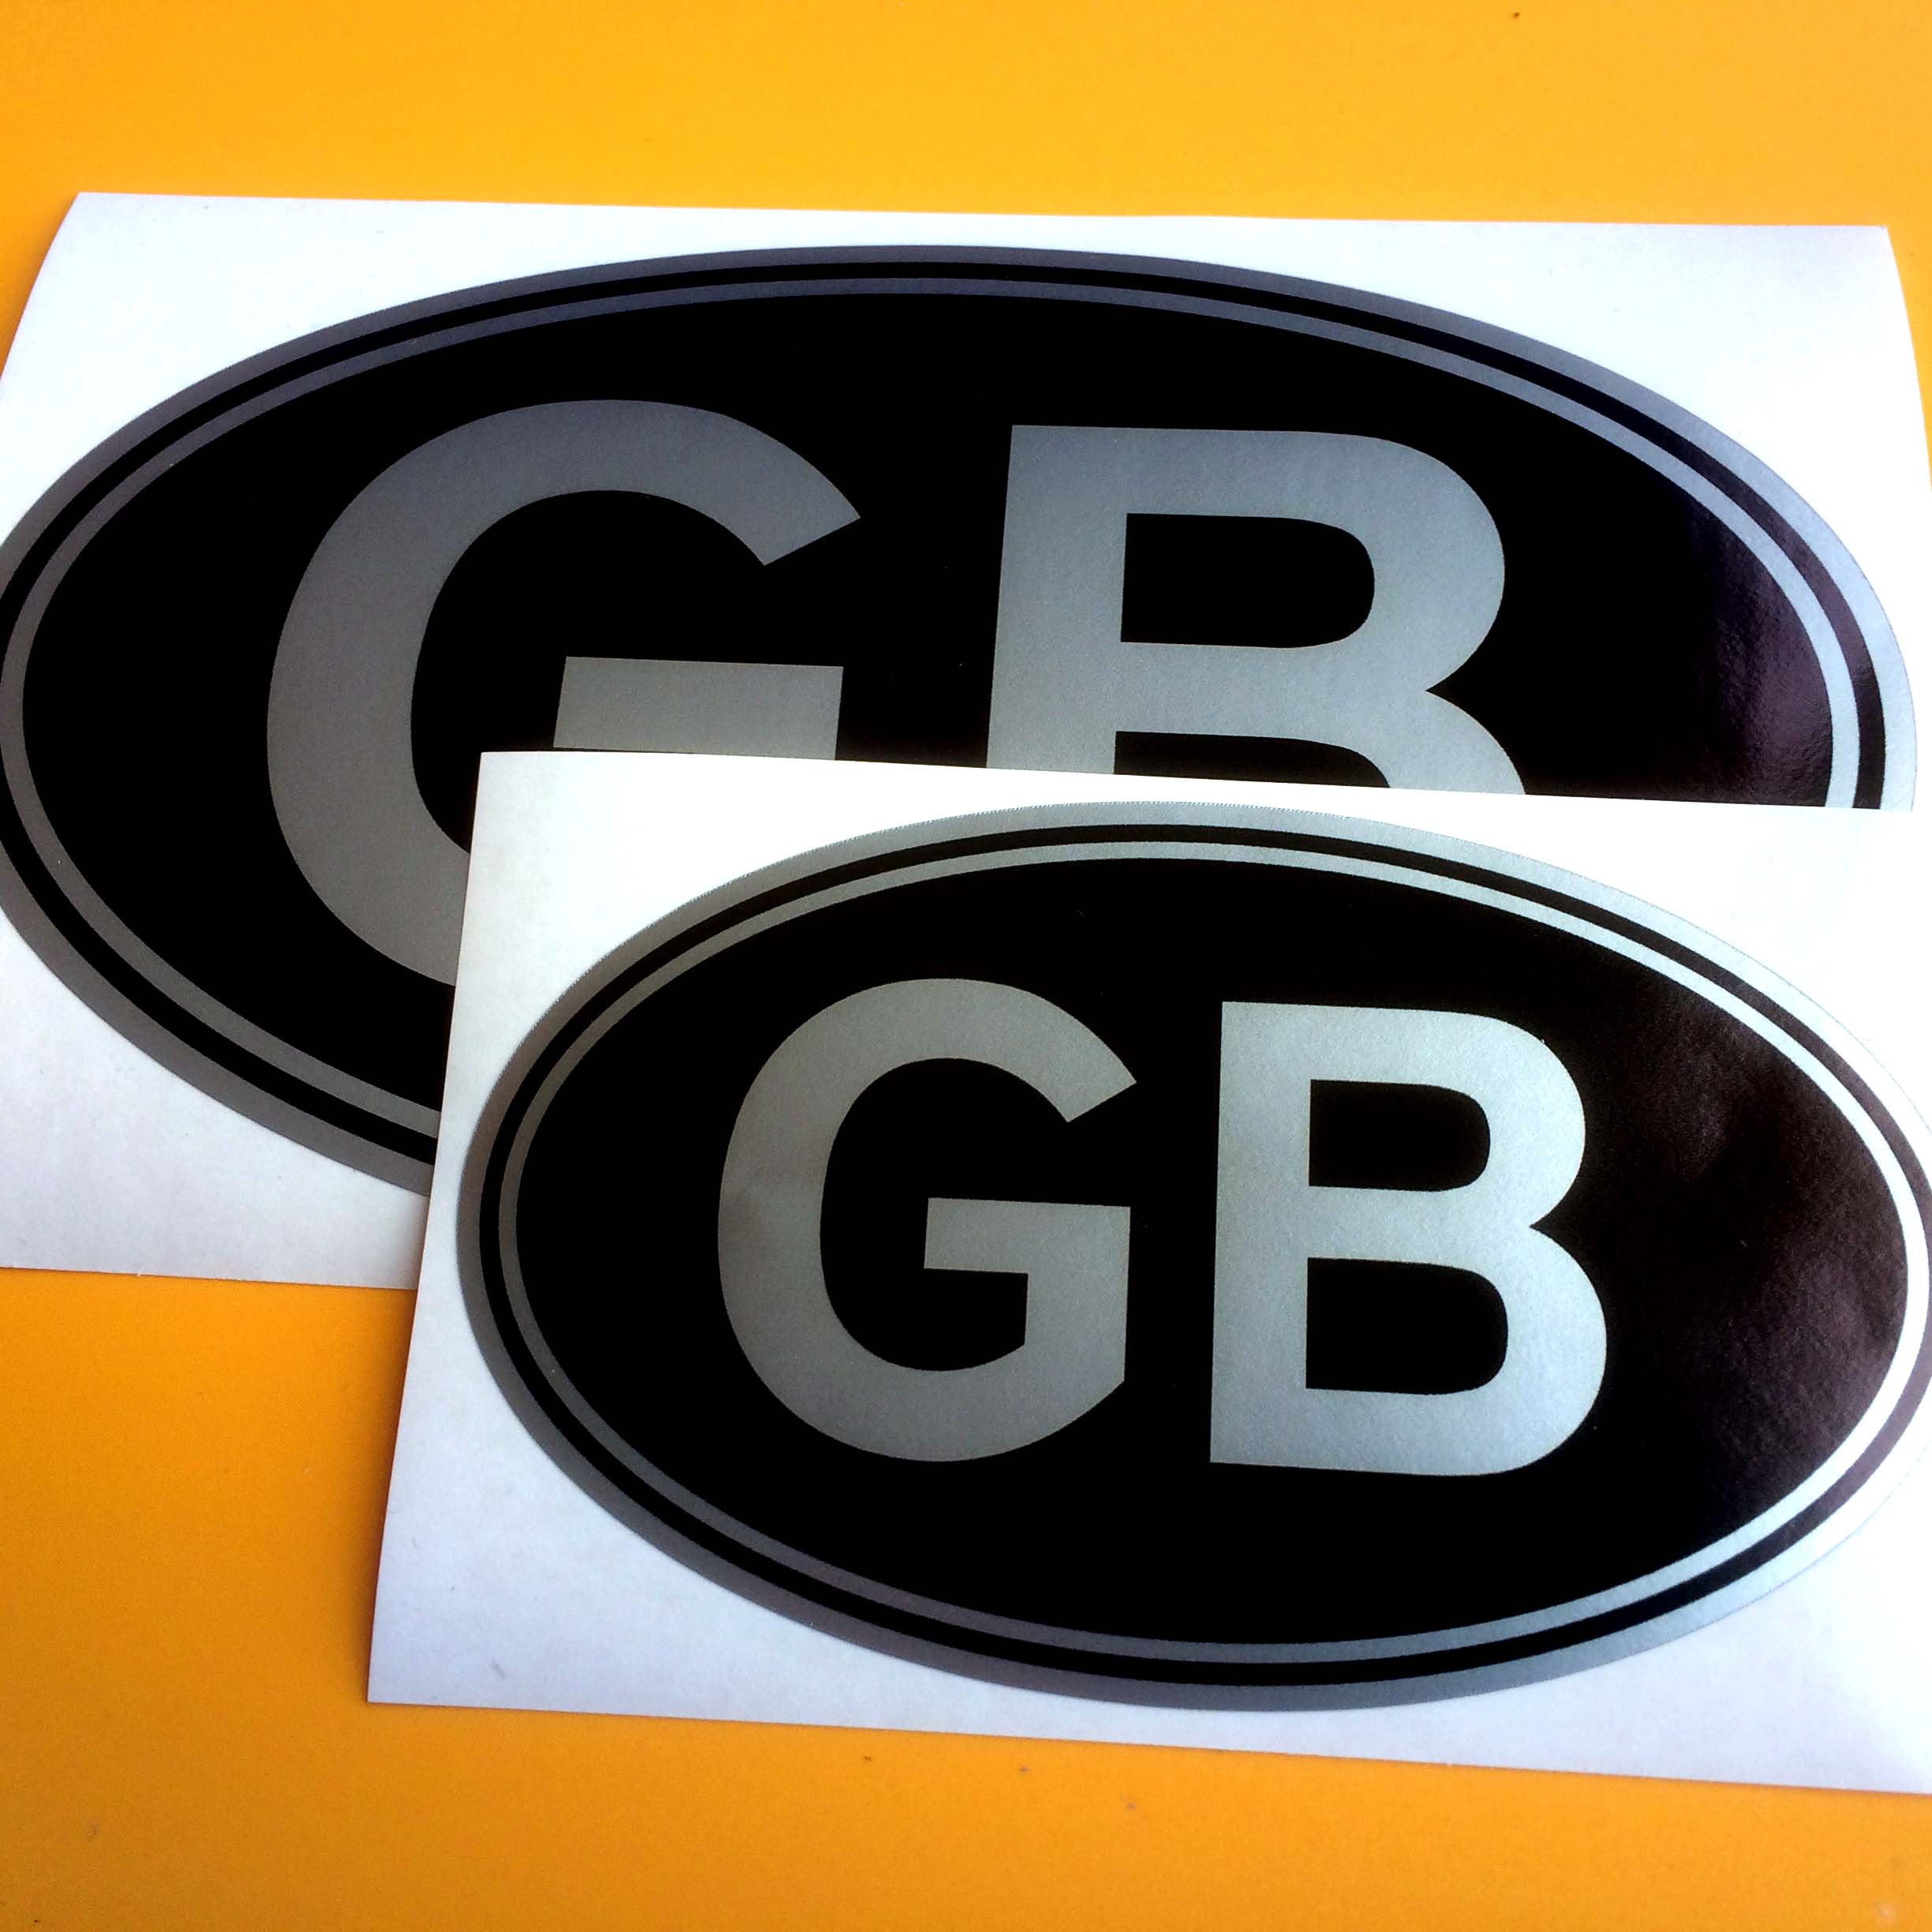 GB in bold silver lettering on a black oval sticker with a silver border.